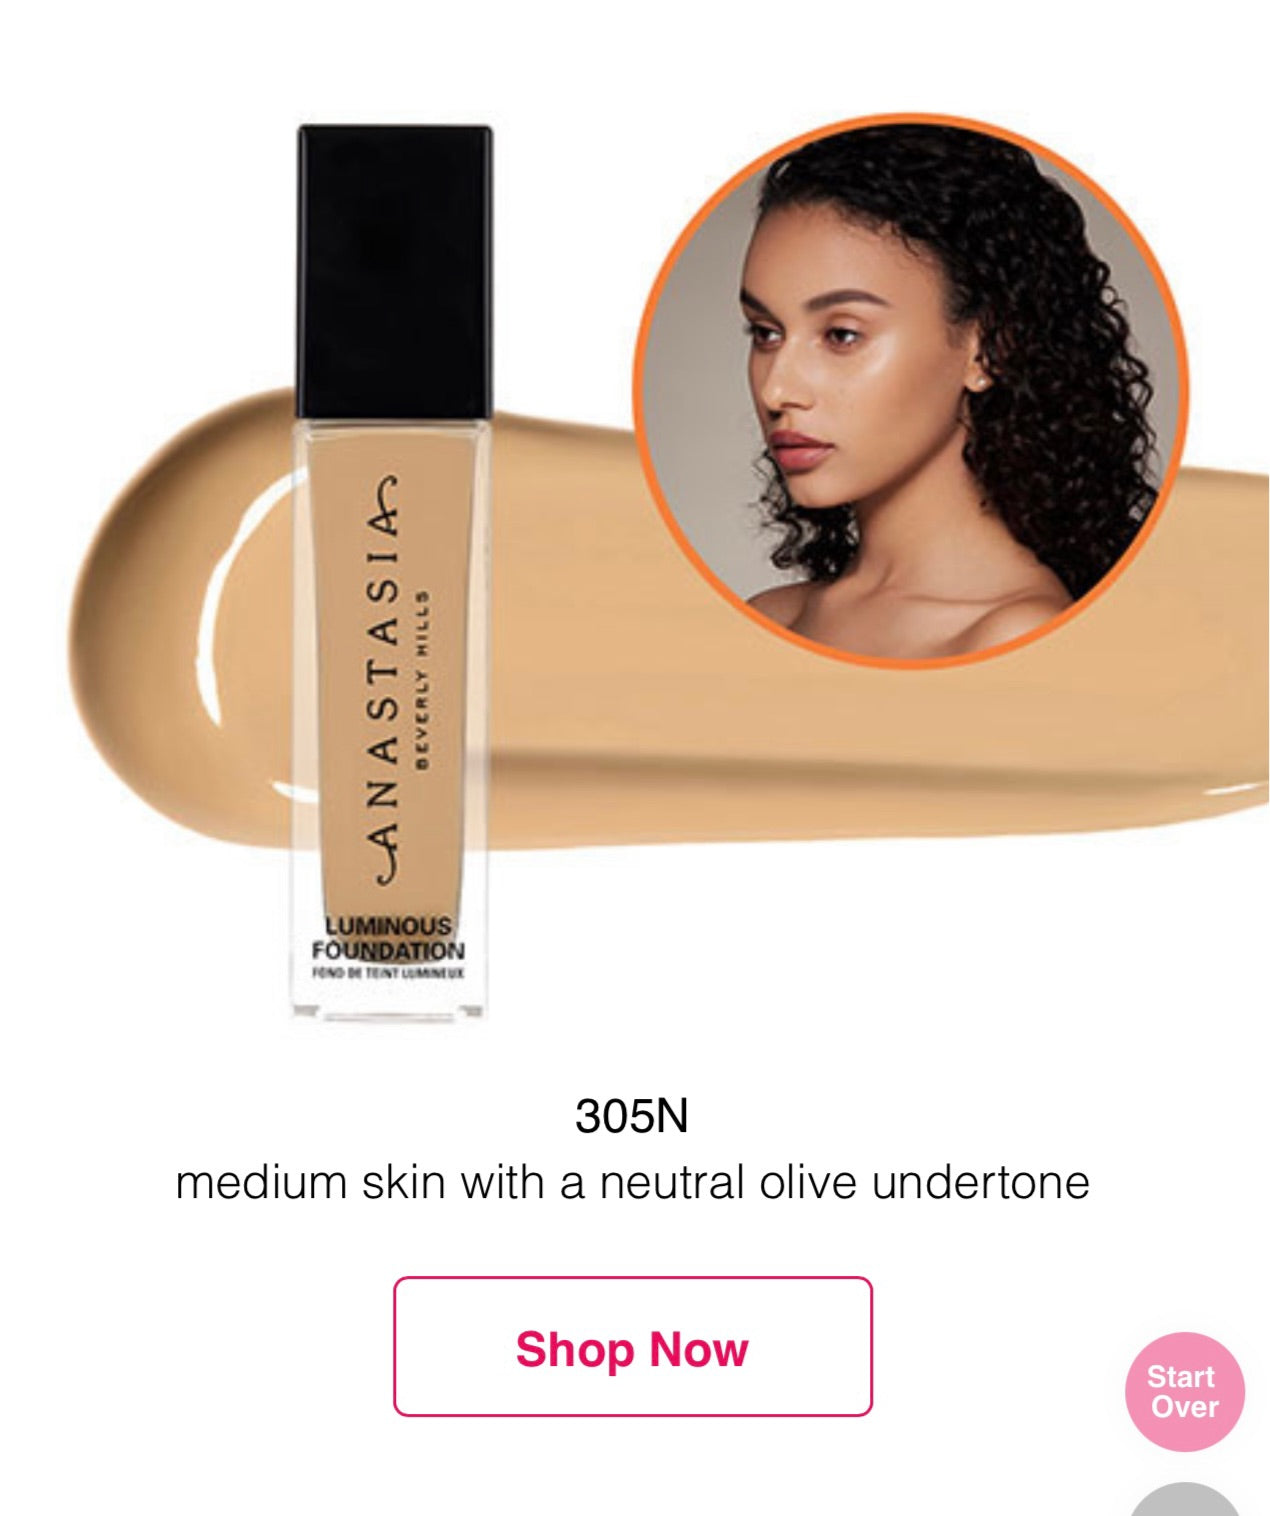 des beverly foundation – coin luminous hills 305N filles Le anastasia